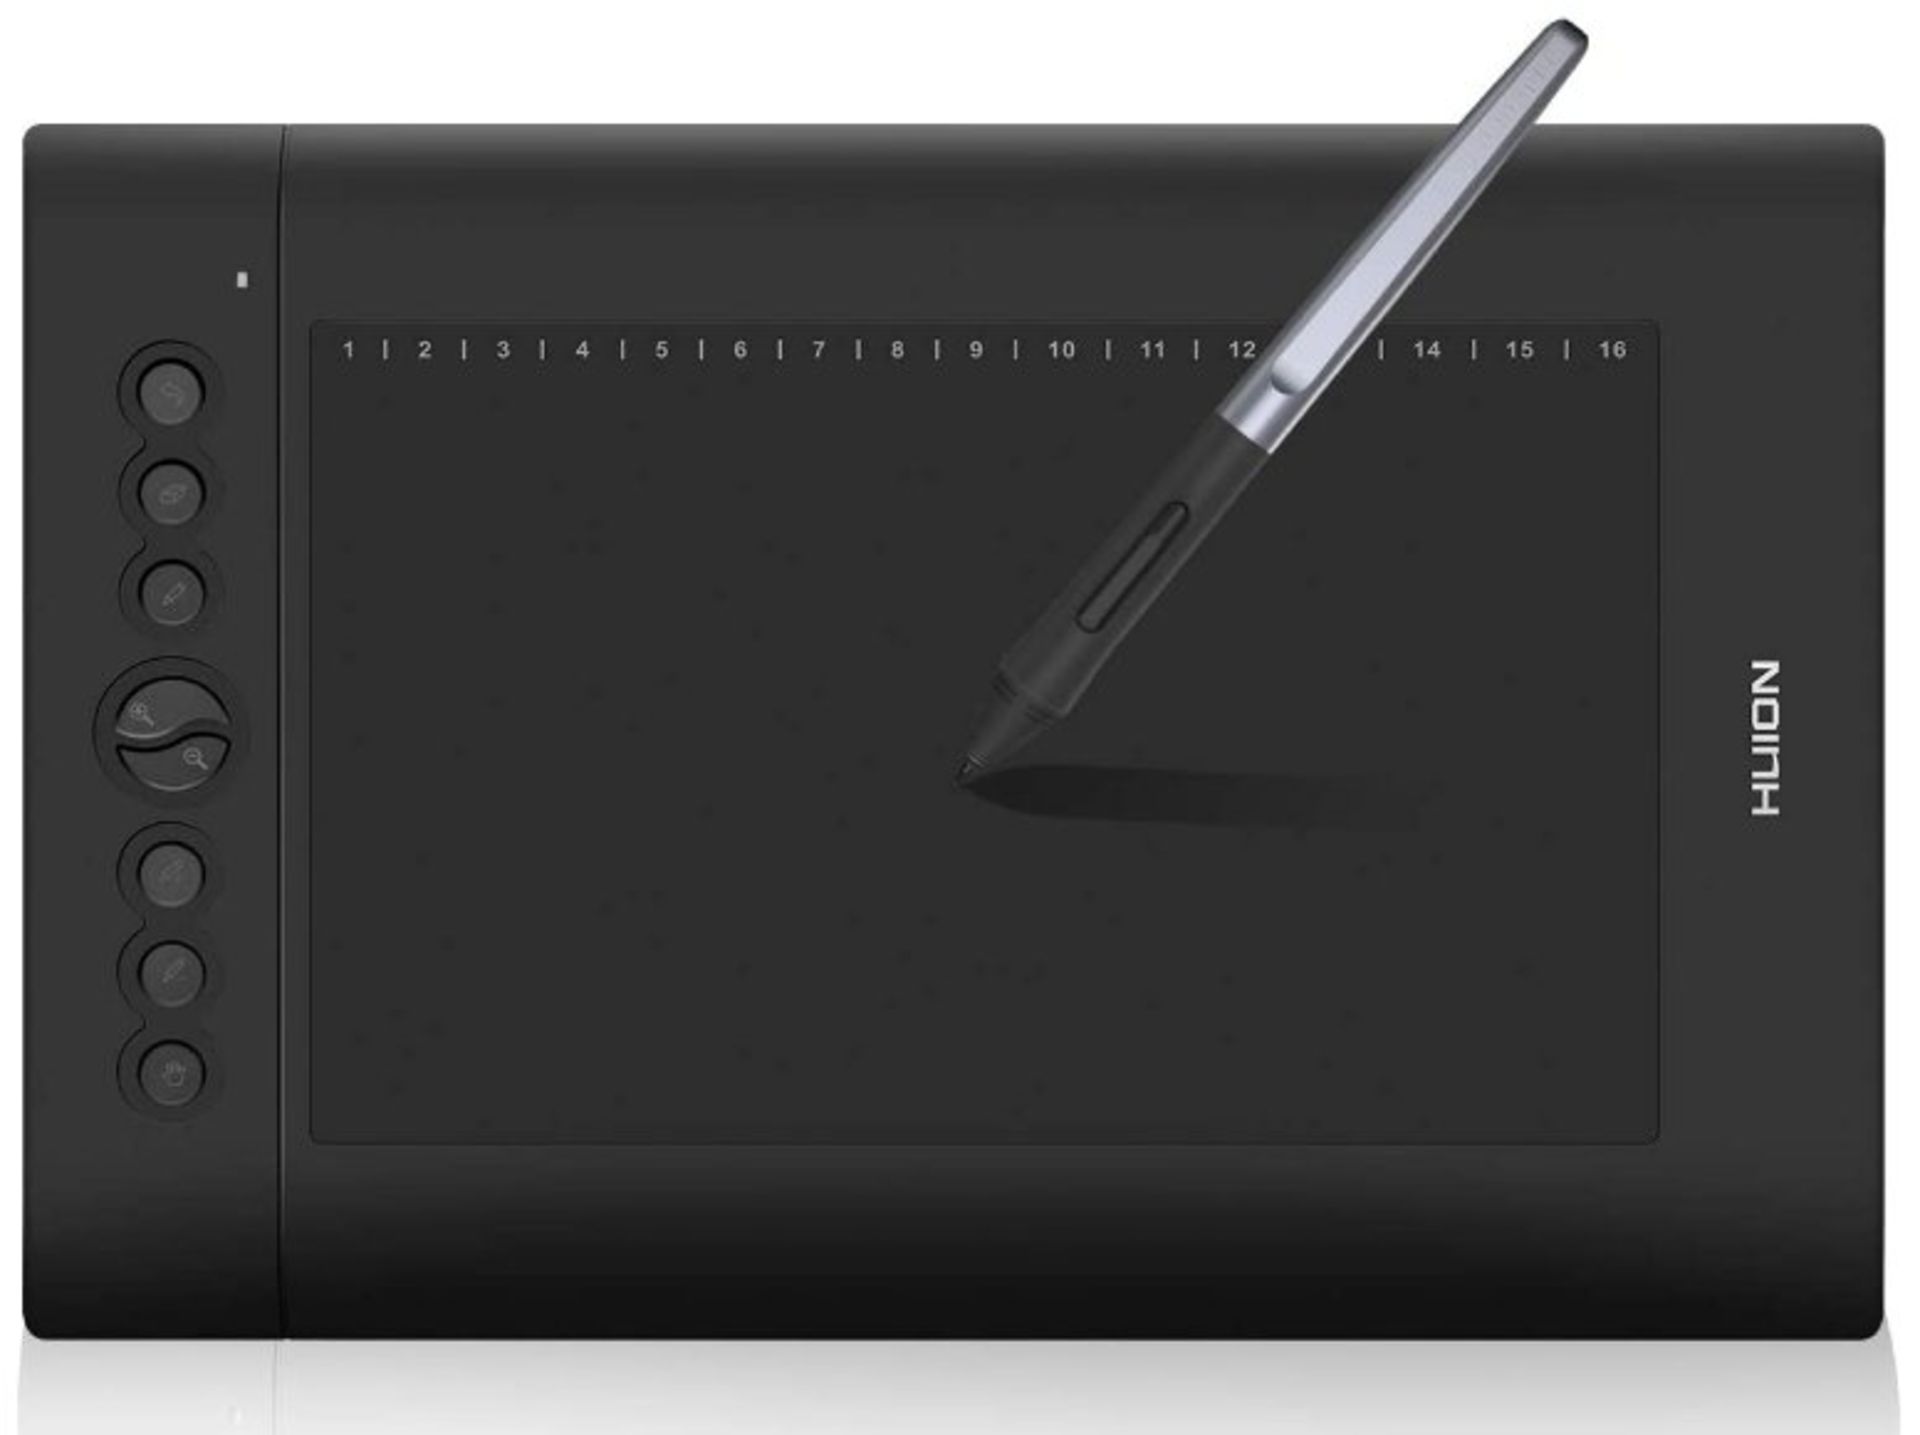 A boxed as new Huion Graphics Drawing Pen Tablet H610 Pro. 8192 Levels of Pressure Sensitivity. 10 x